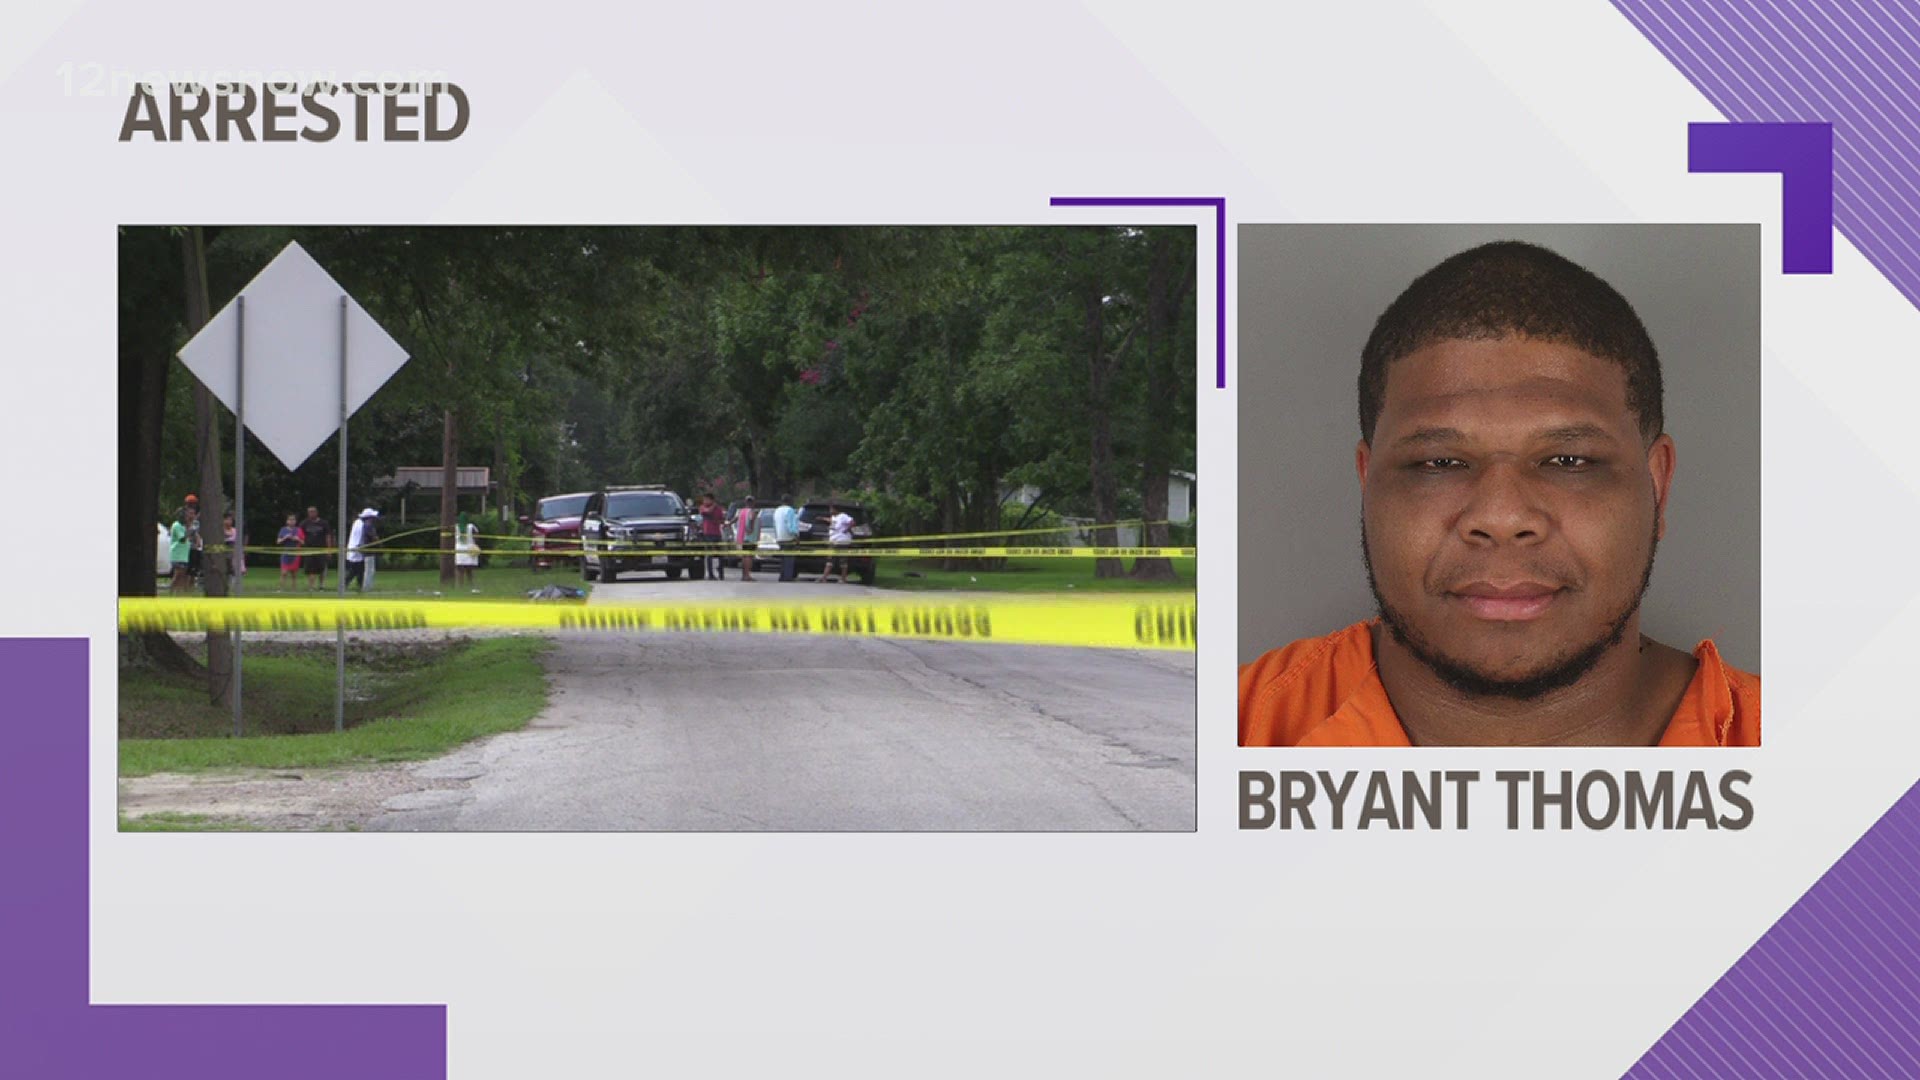 Police arrested Bryant Keith Thomas, 36, of Beaumont, and are charging him with the shooting death of Herbert Bendy III, 47, of Beaumont according to a news release